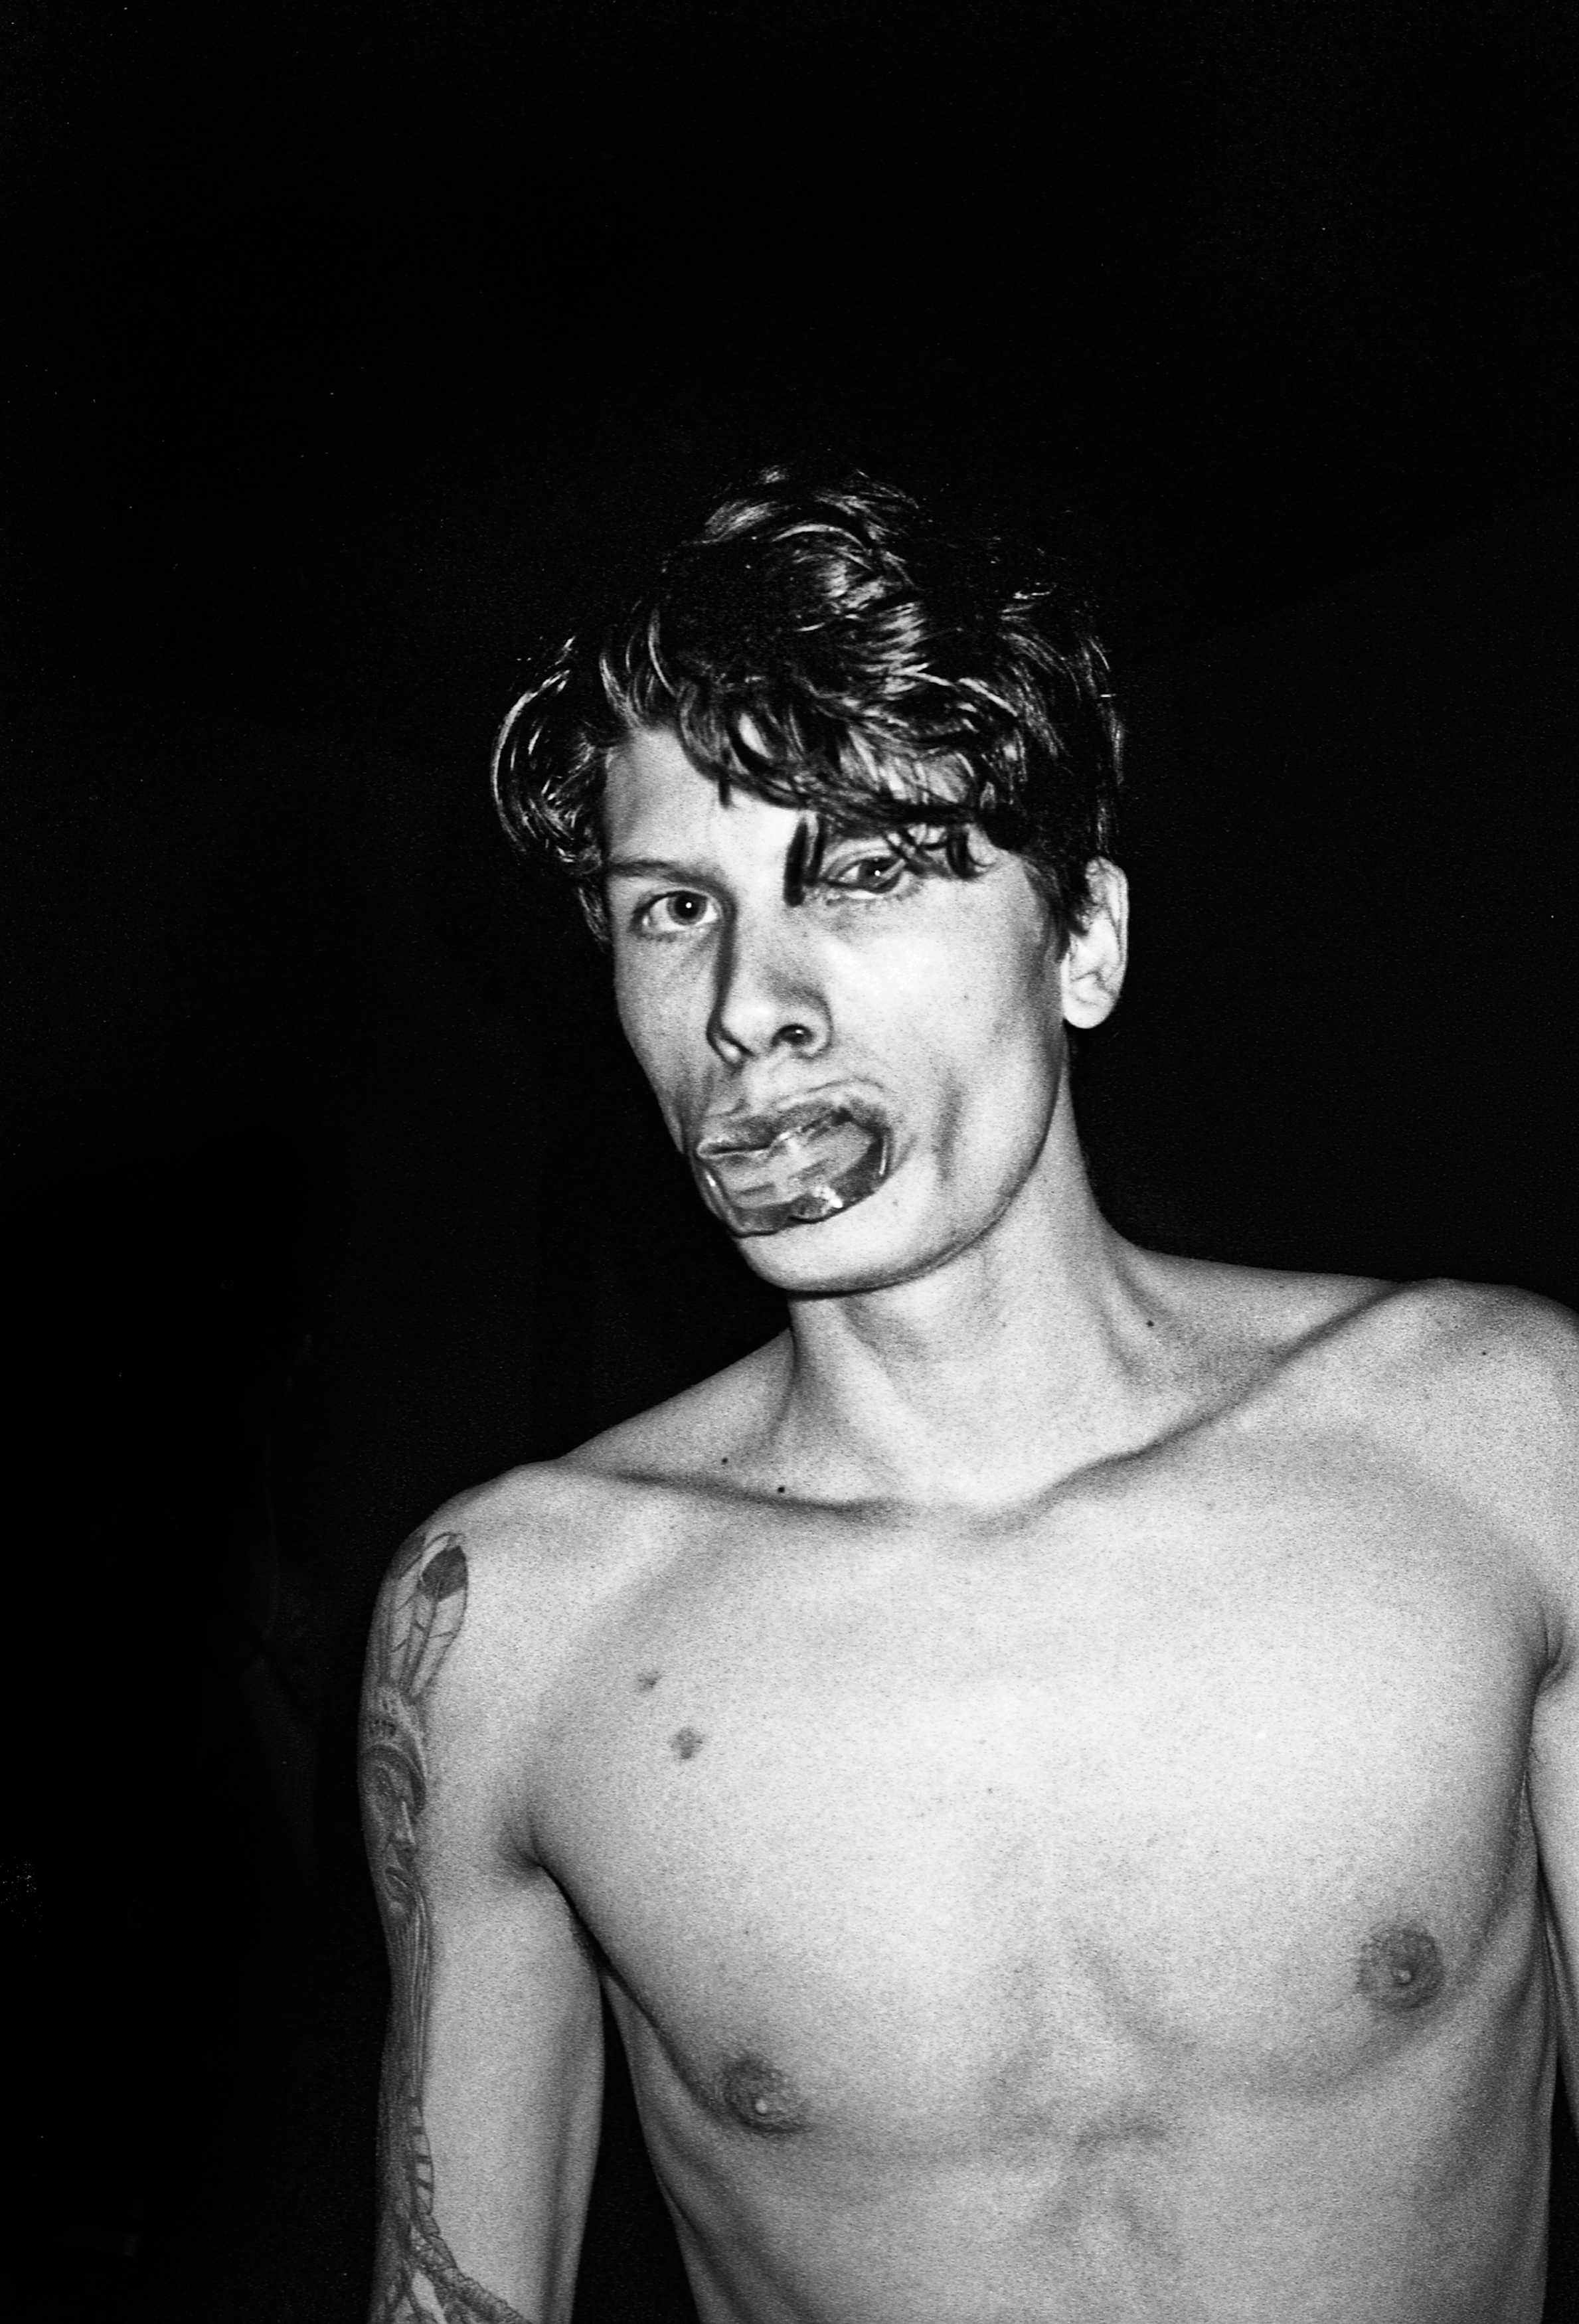 Right before his fight, Julian throwing mouthguard in. (Old Fire House Soho, February, 2012)